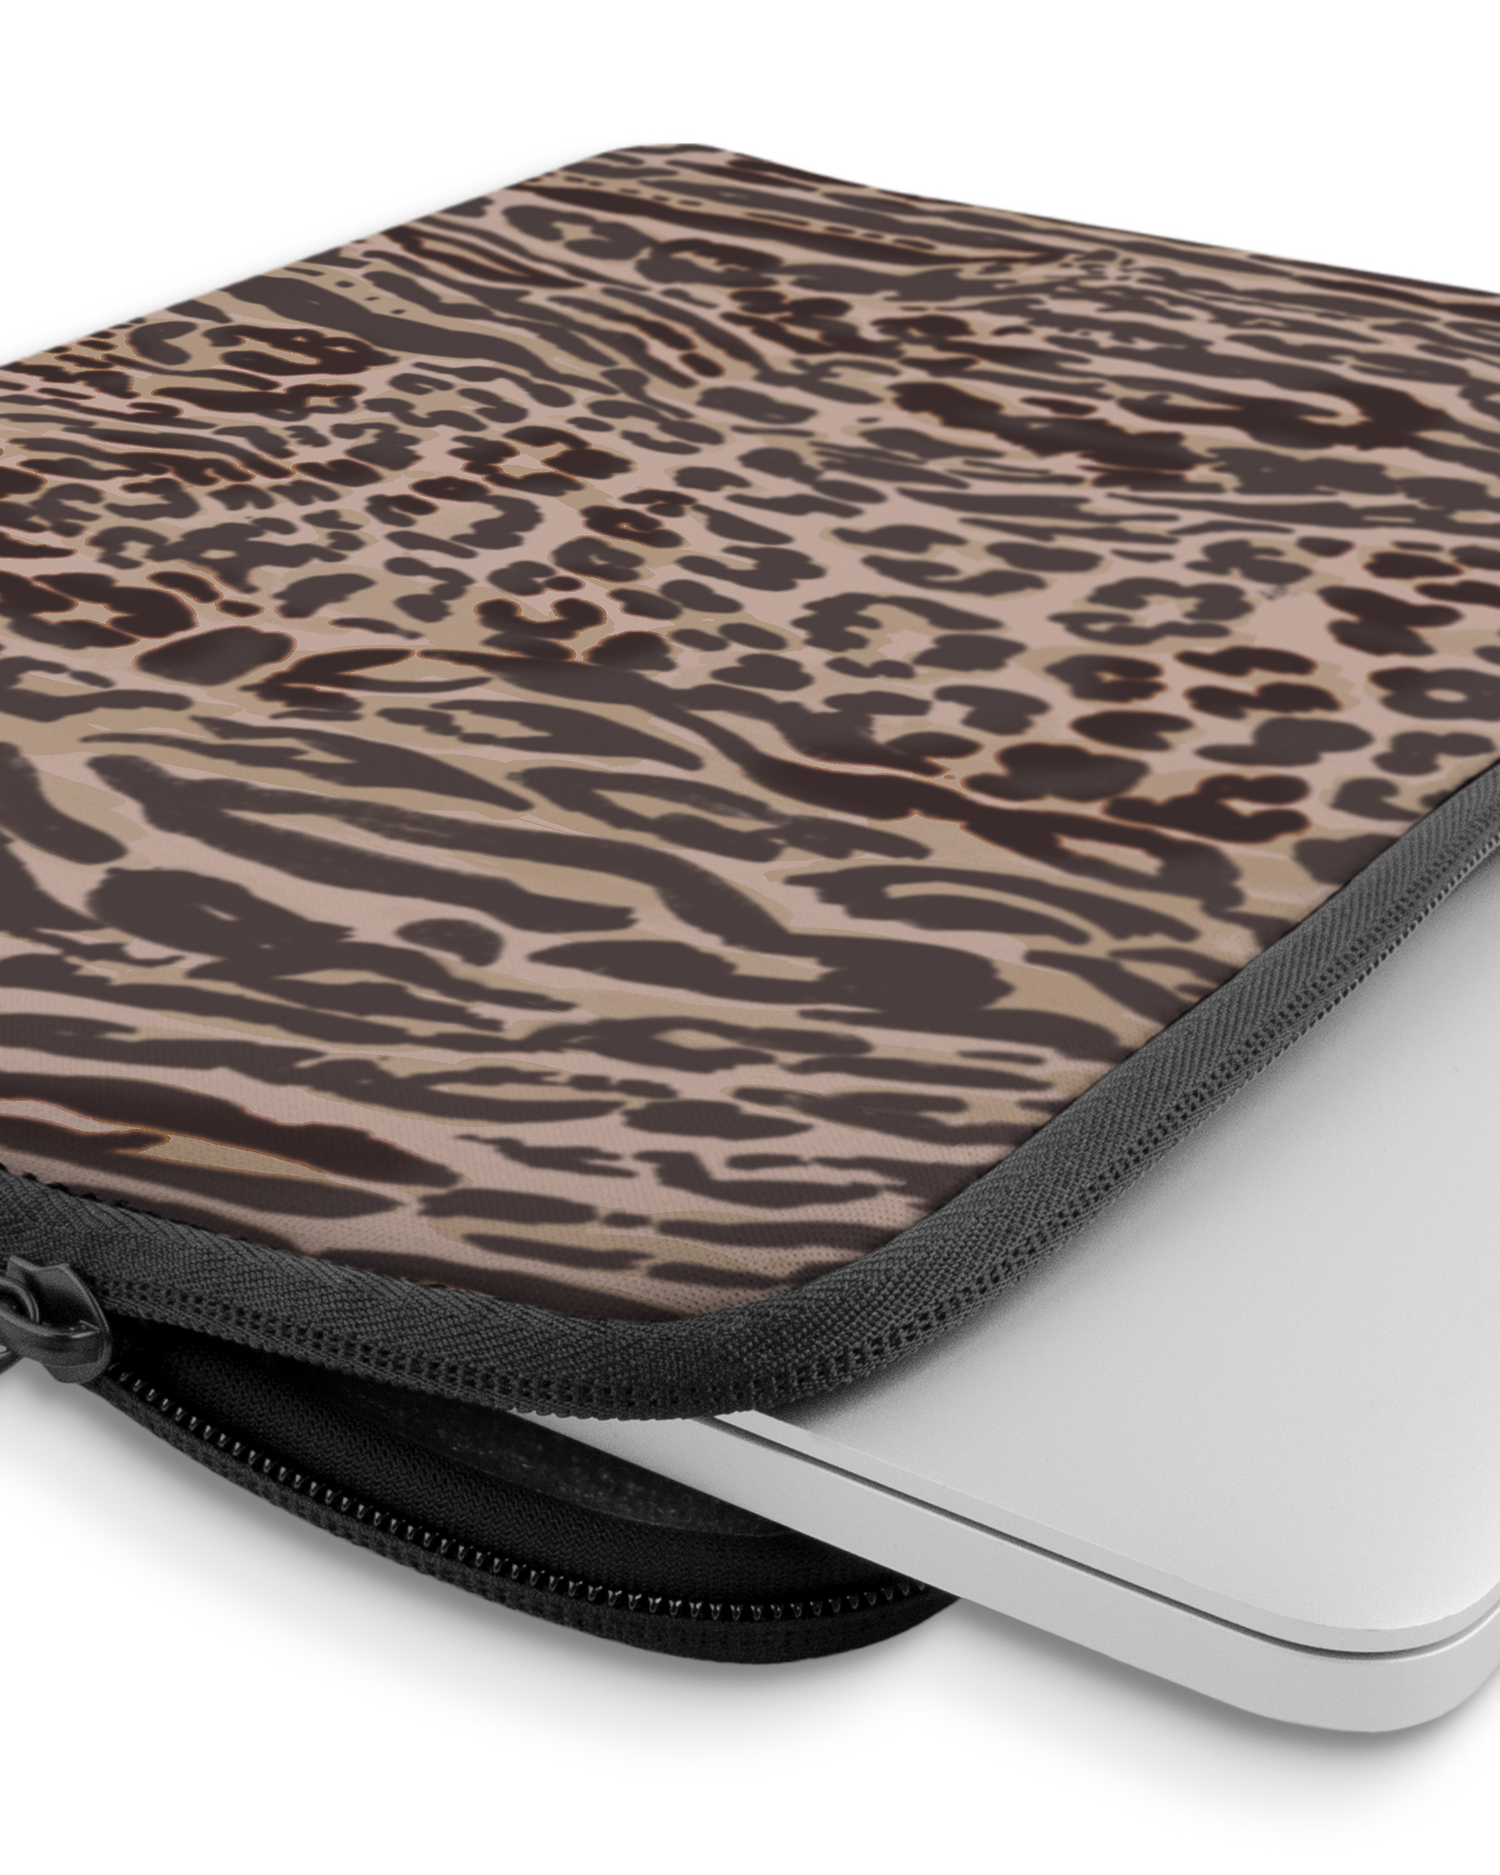 Animal Skin Tough Love Laptop Case 13-14 inch with device inside